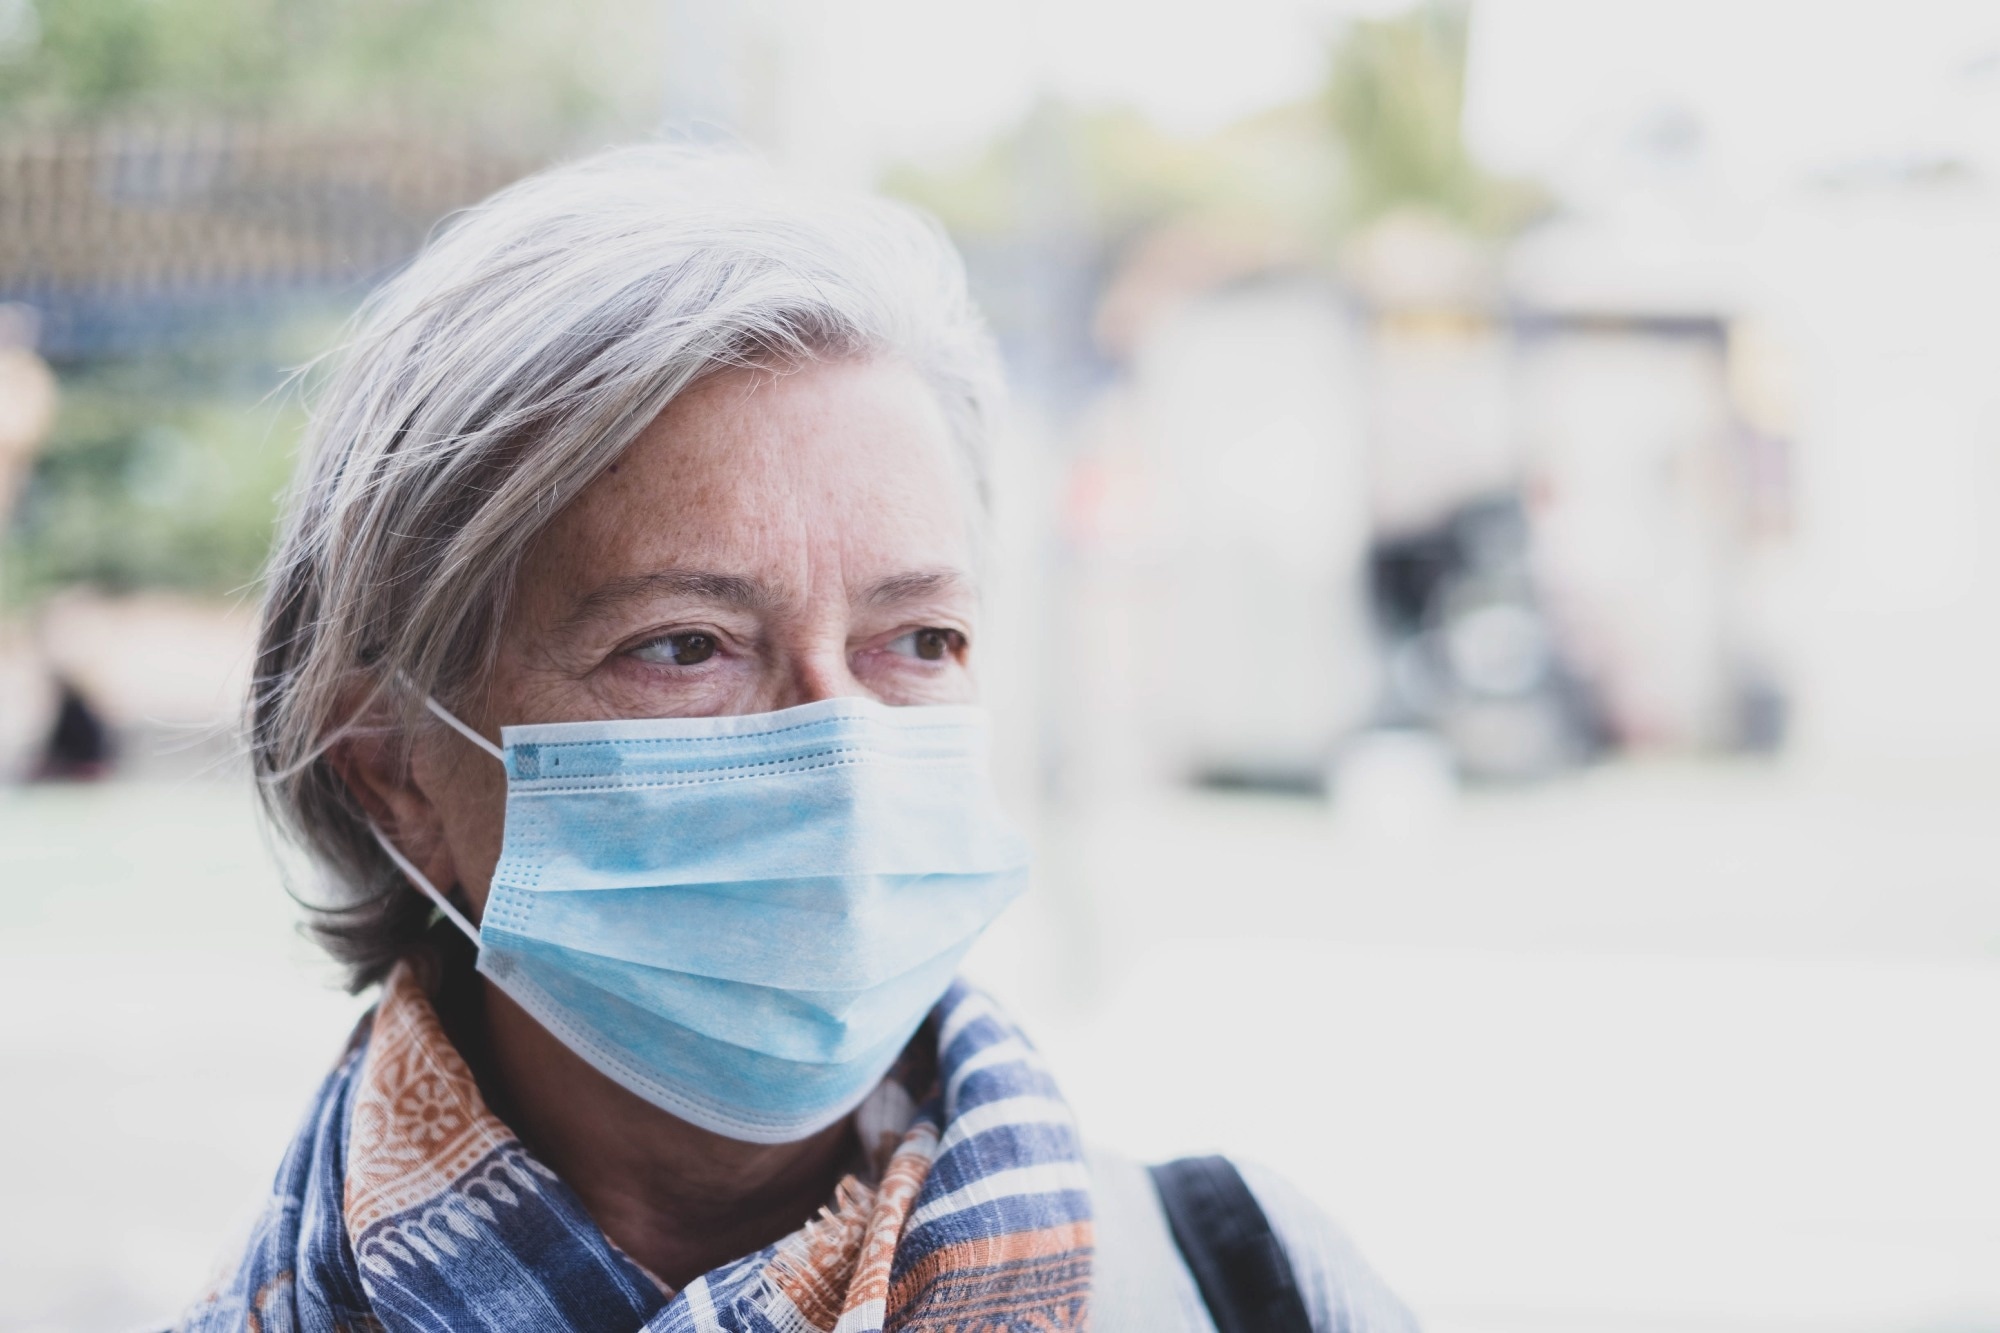 Updated evidence suggests that masks may be associated with a reduction in risk for SARS-CoV-2 infection